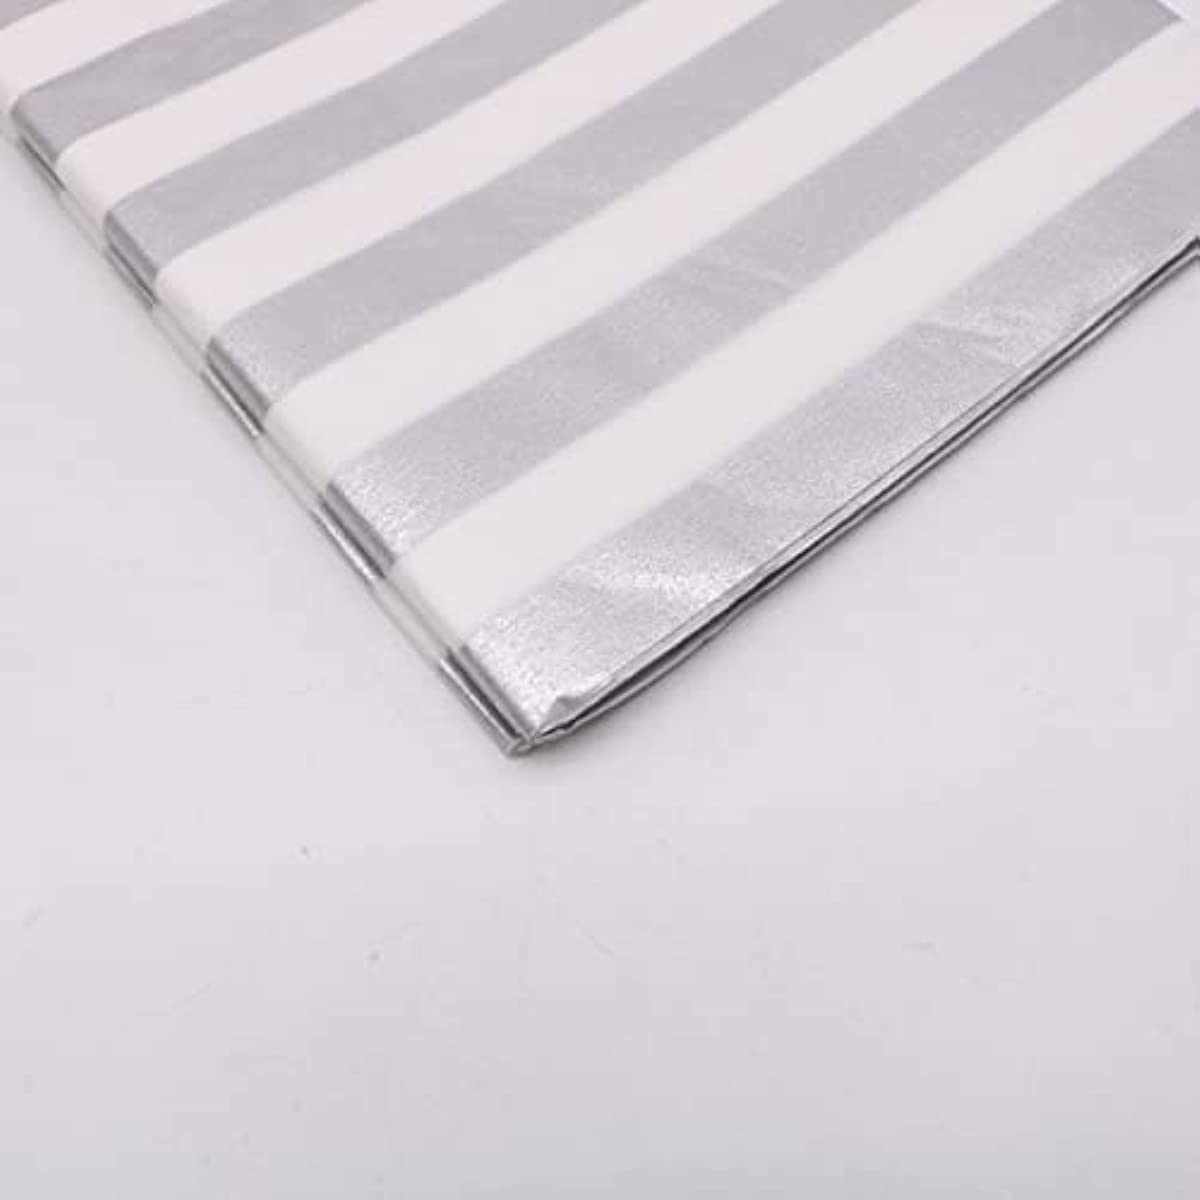 4) NEW Silver Chrome Paper Gift Bags W/ TISSUE PAPER & Tags Handles  10x8.5x4.5